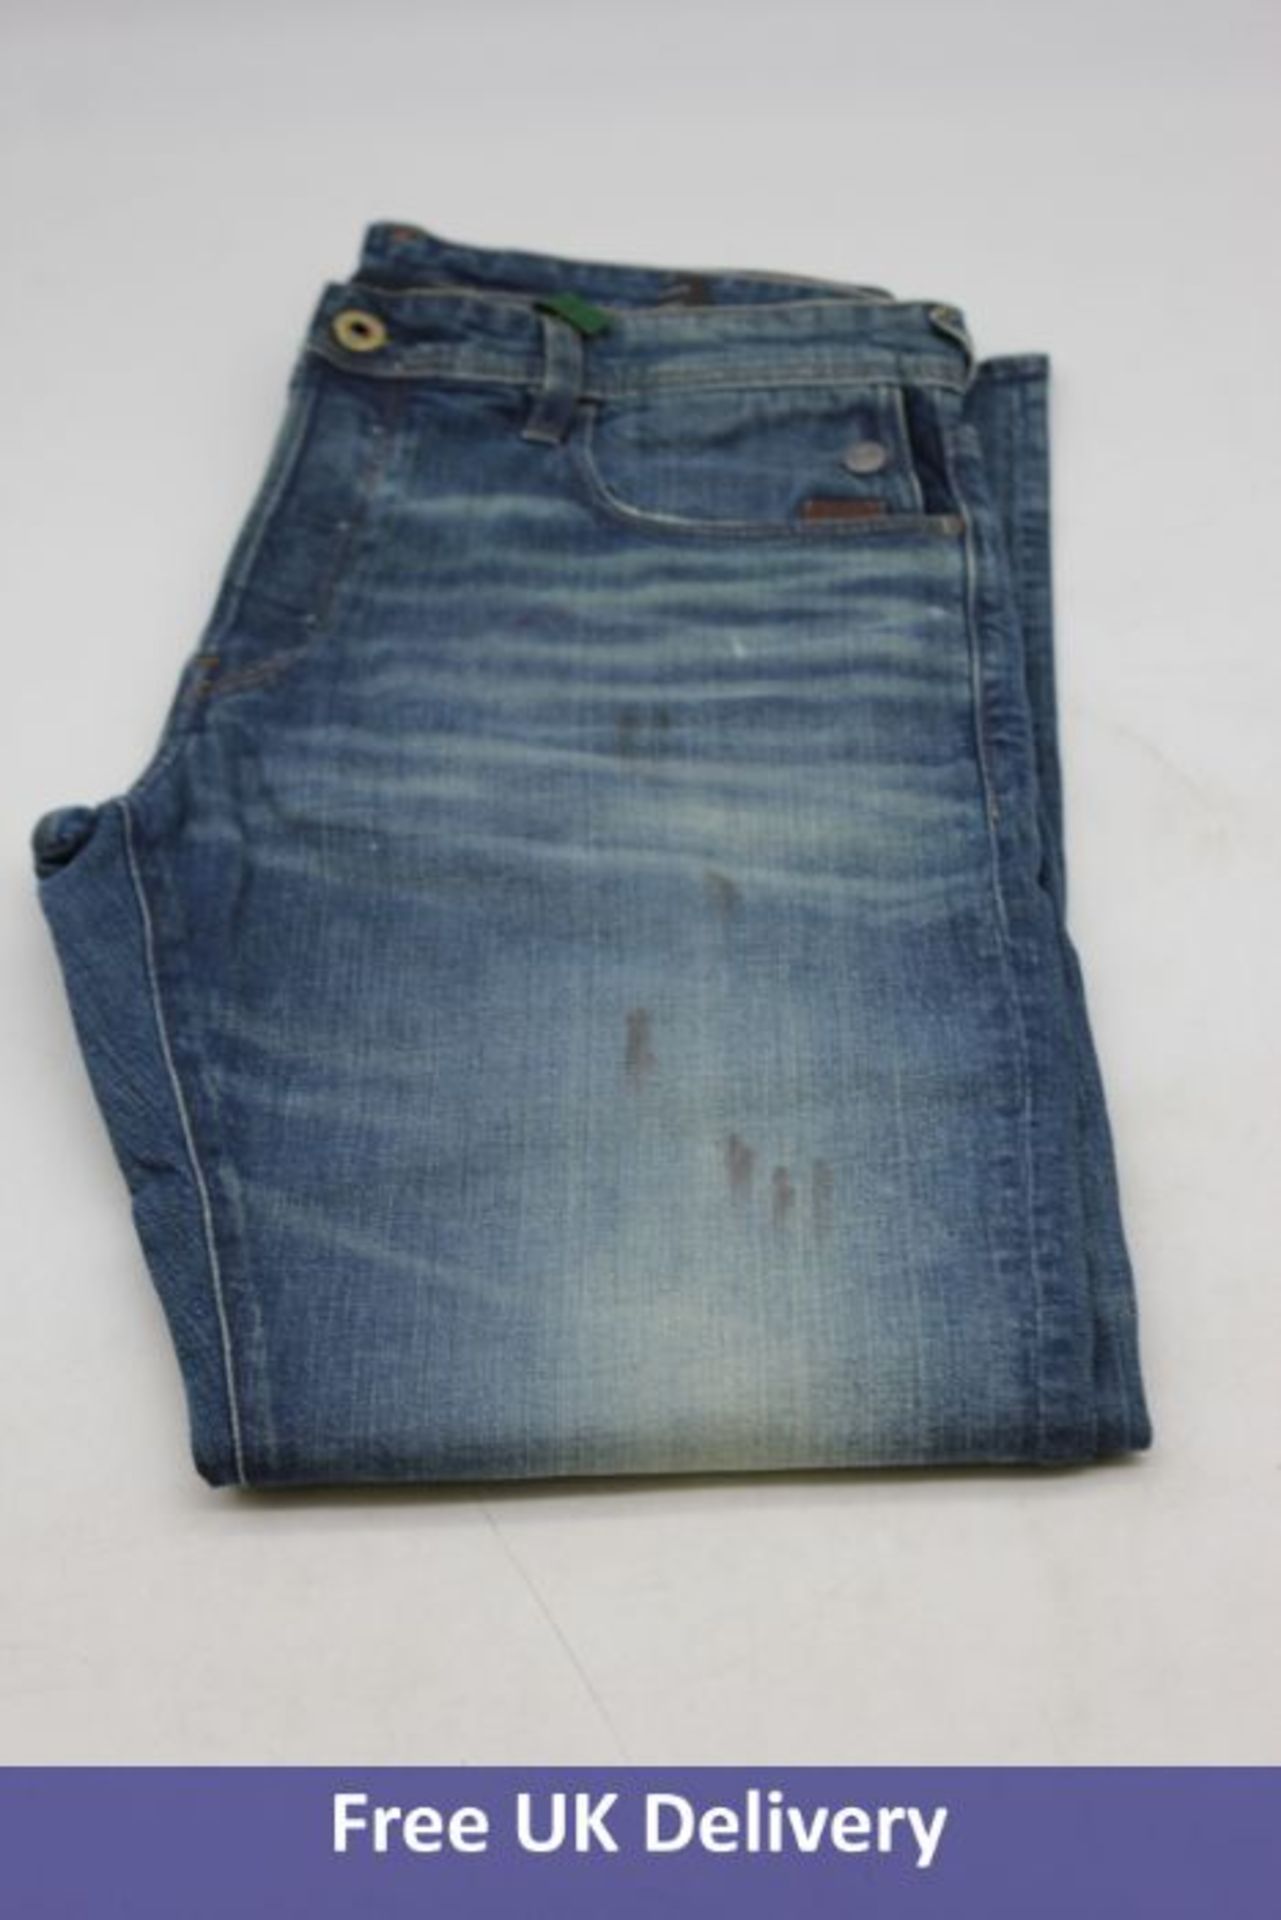 Two G Star Raw Men's Jeans to include 1x Original G Blend Slim Jeans, Indigo Dyed, W34, L32 and 1x R